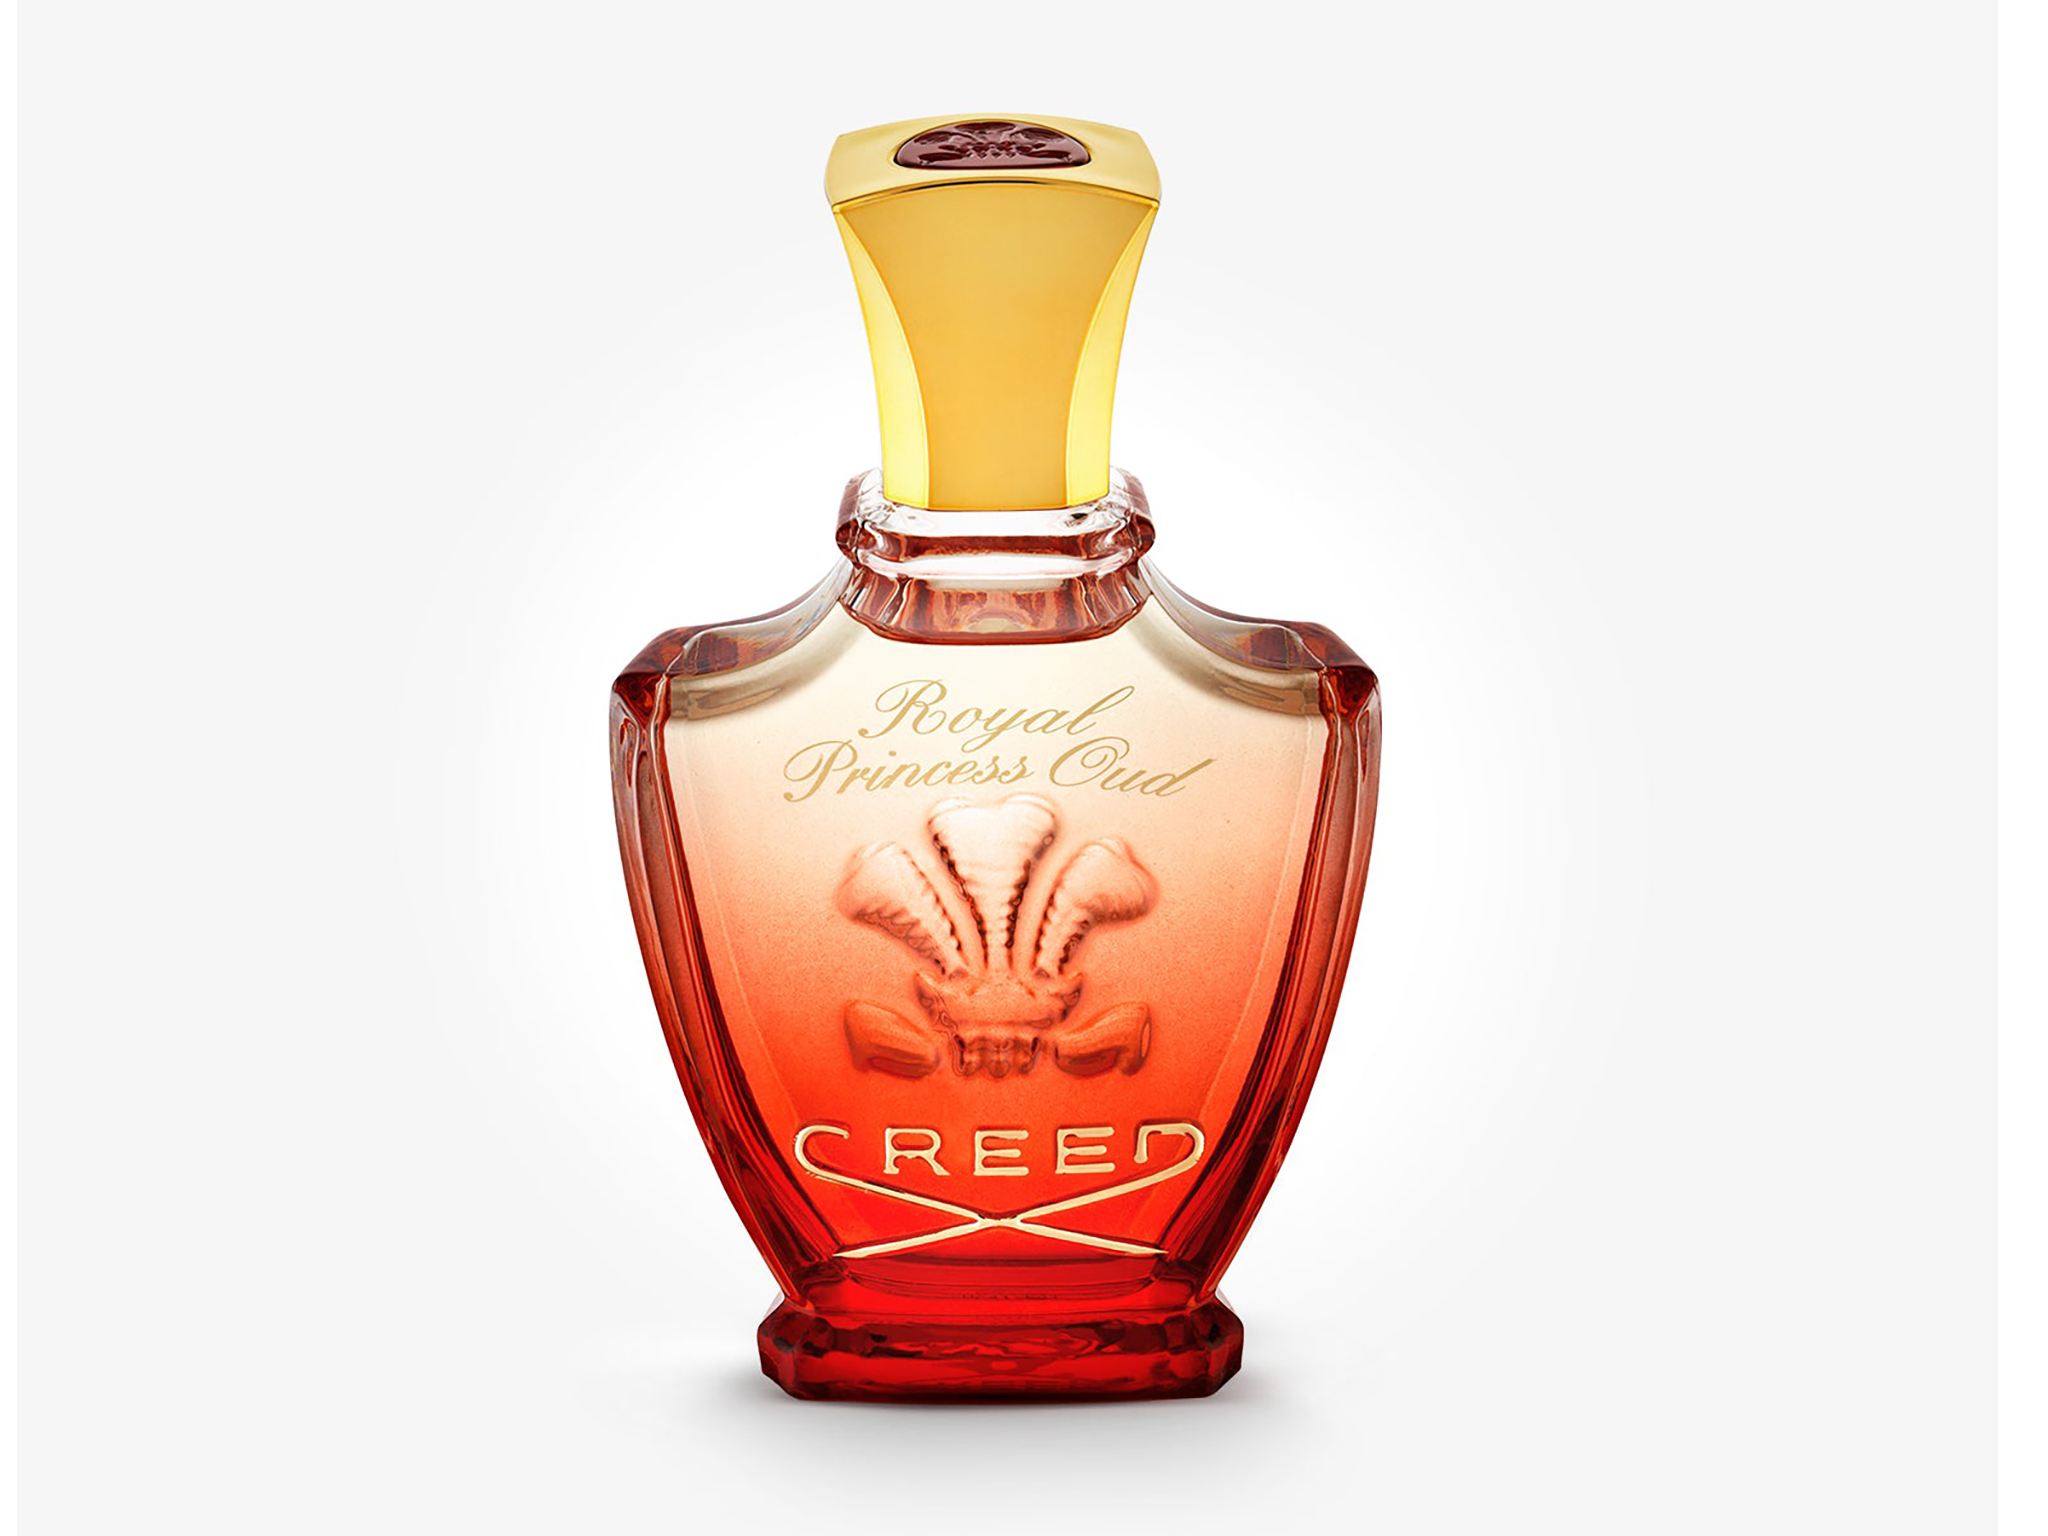 Creed Aventus Style Scented Sachets for Drawers and wardrobes